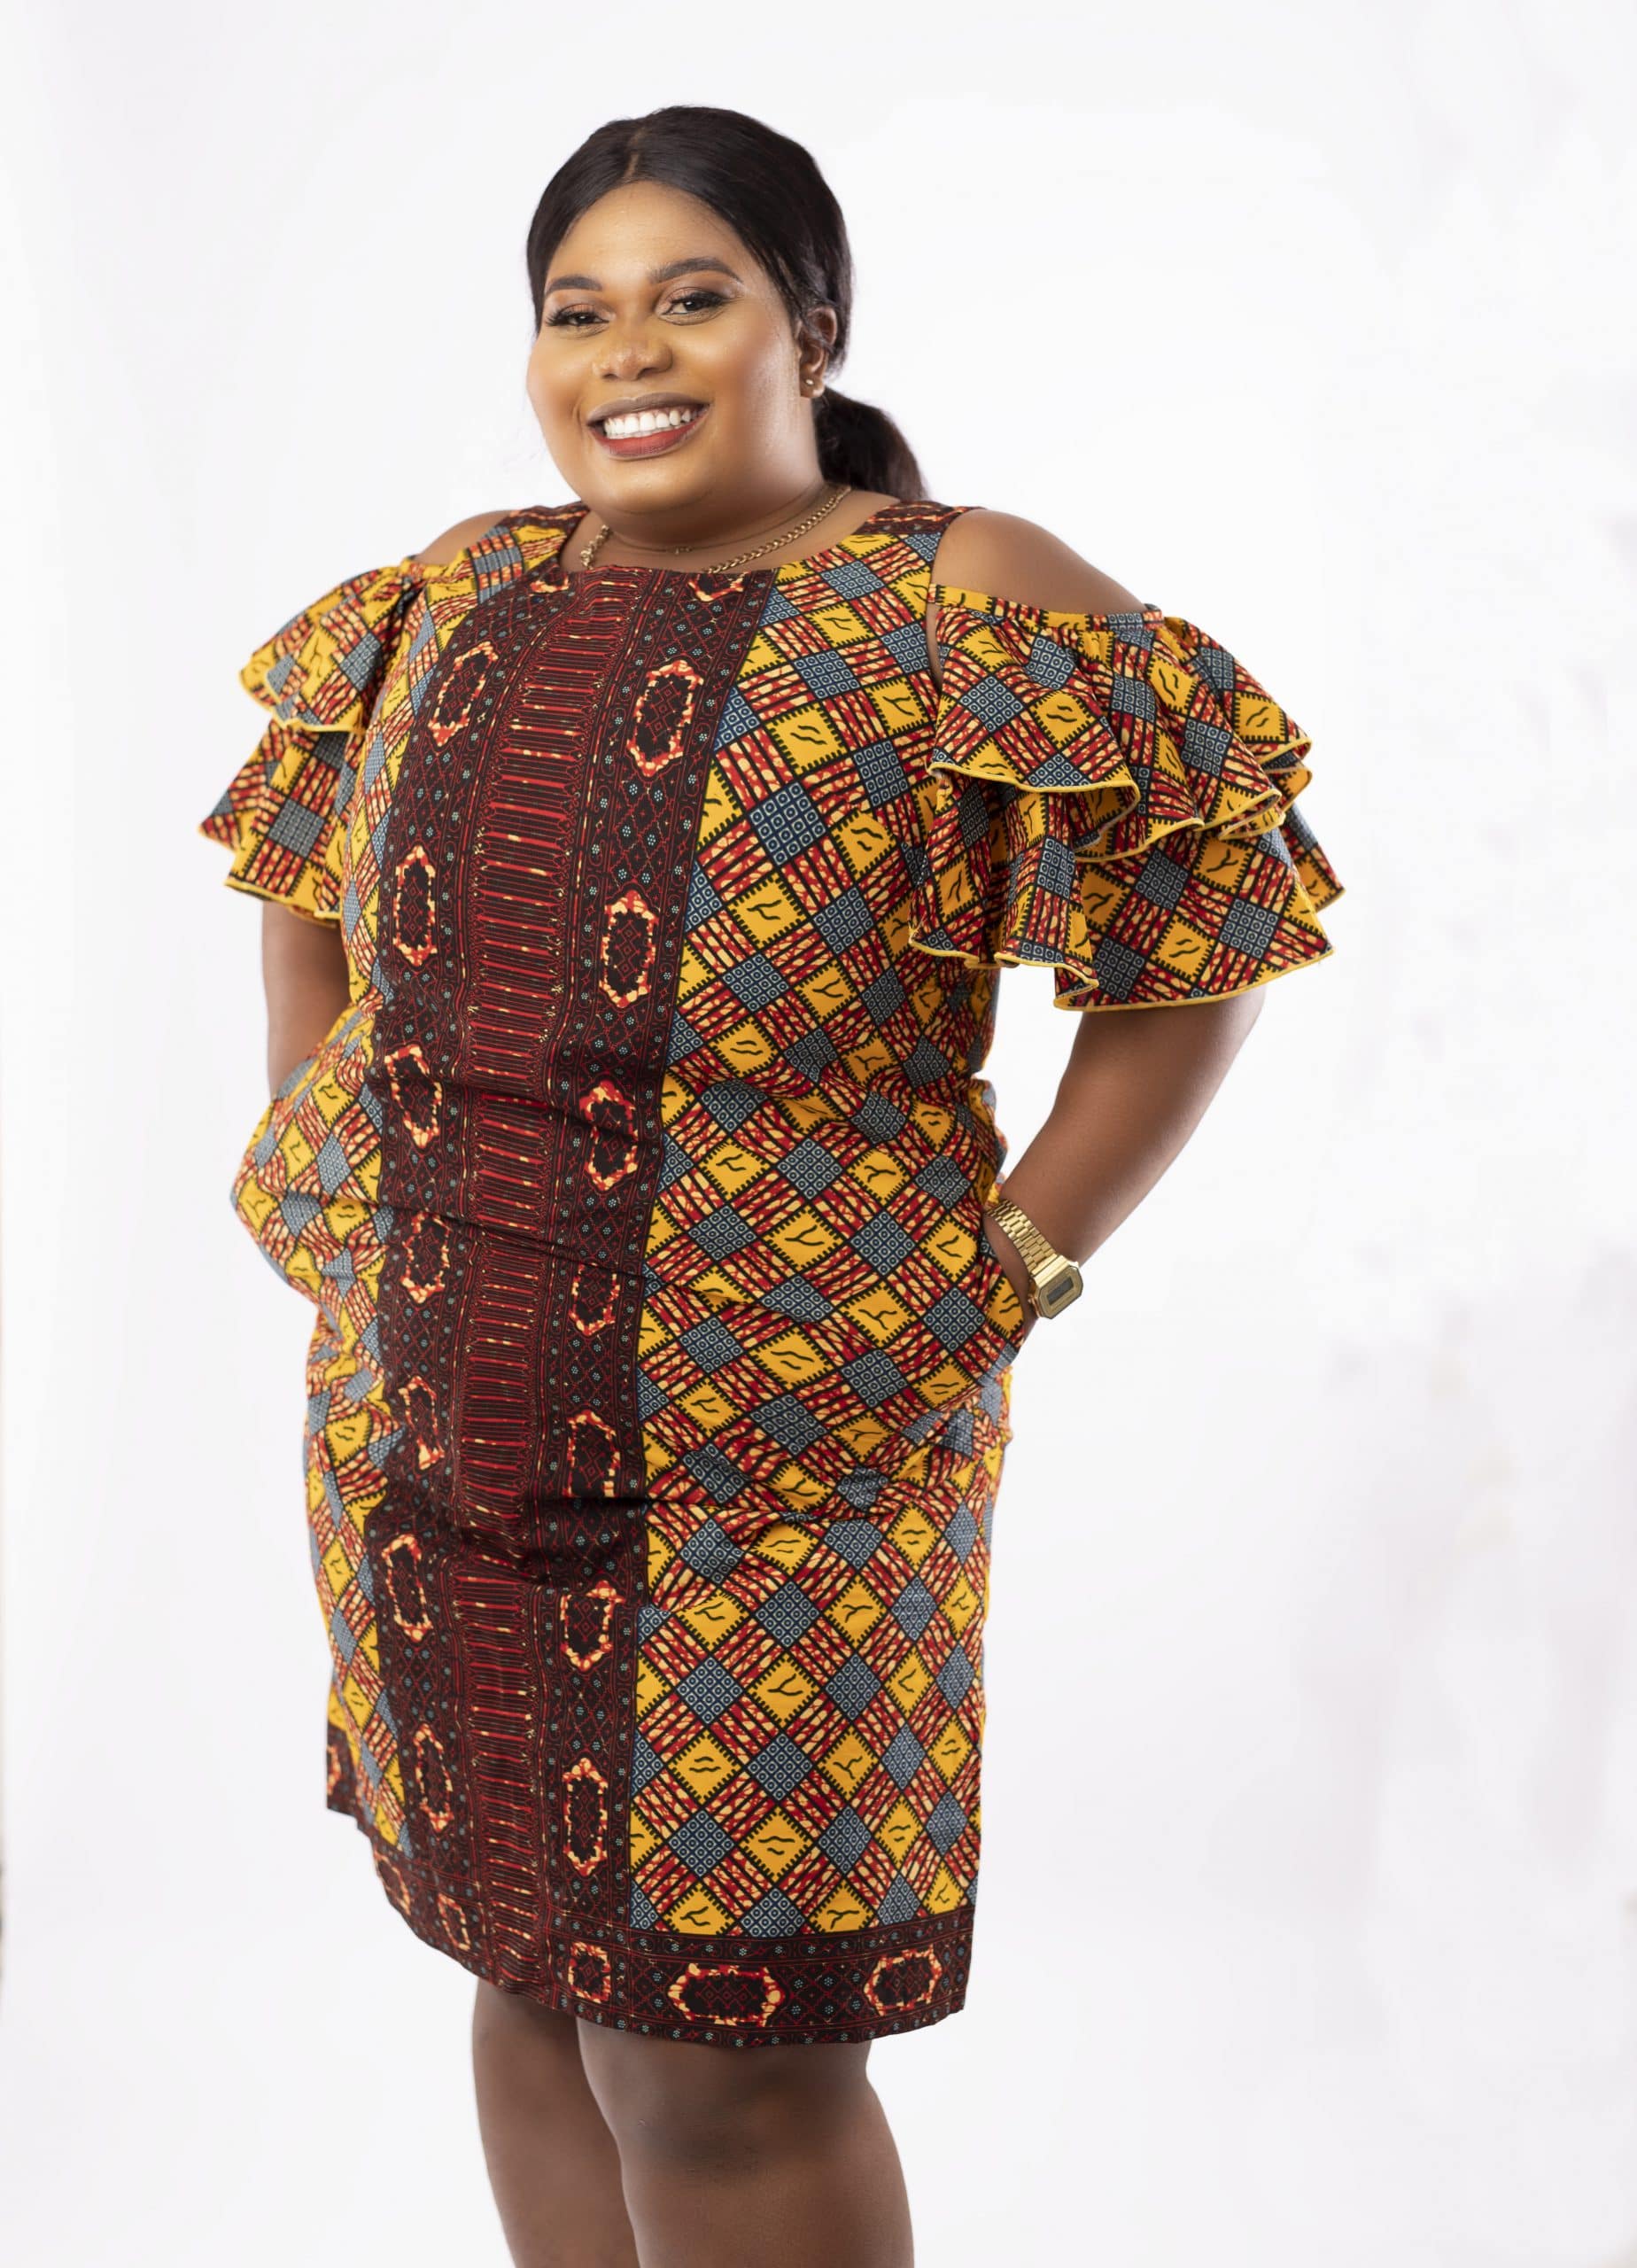 Frontal of model wearing a plus size cold shoulder frill dress in all over African print.